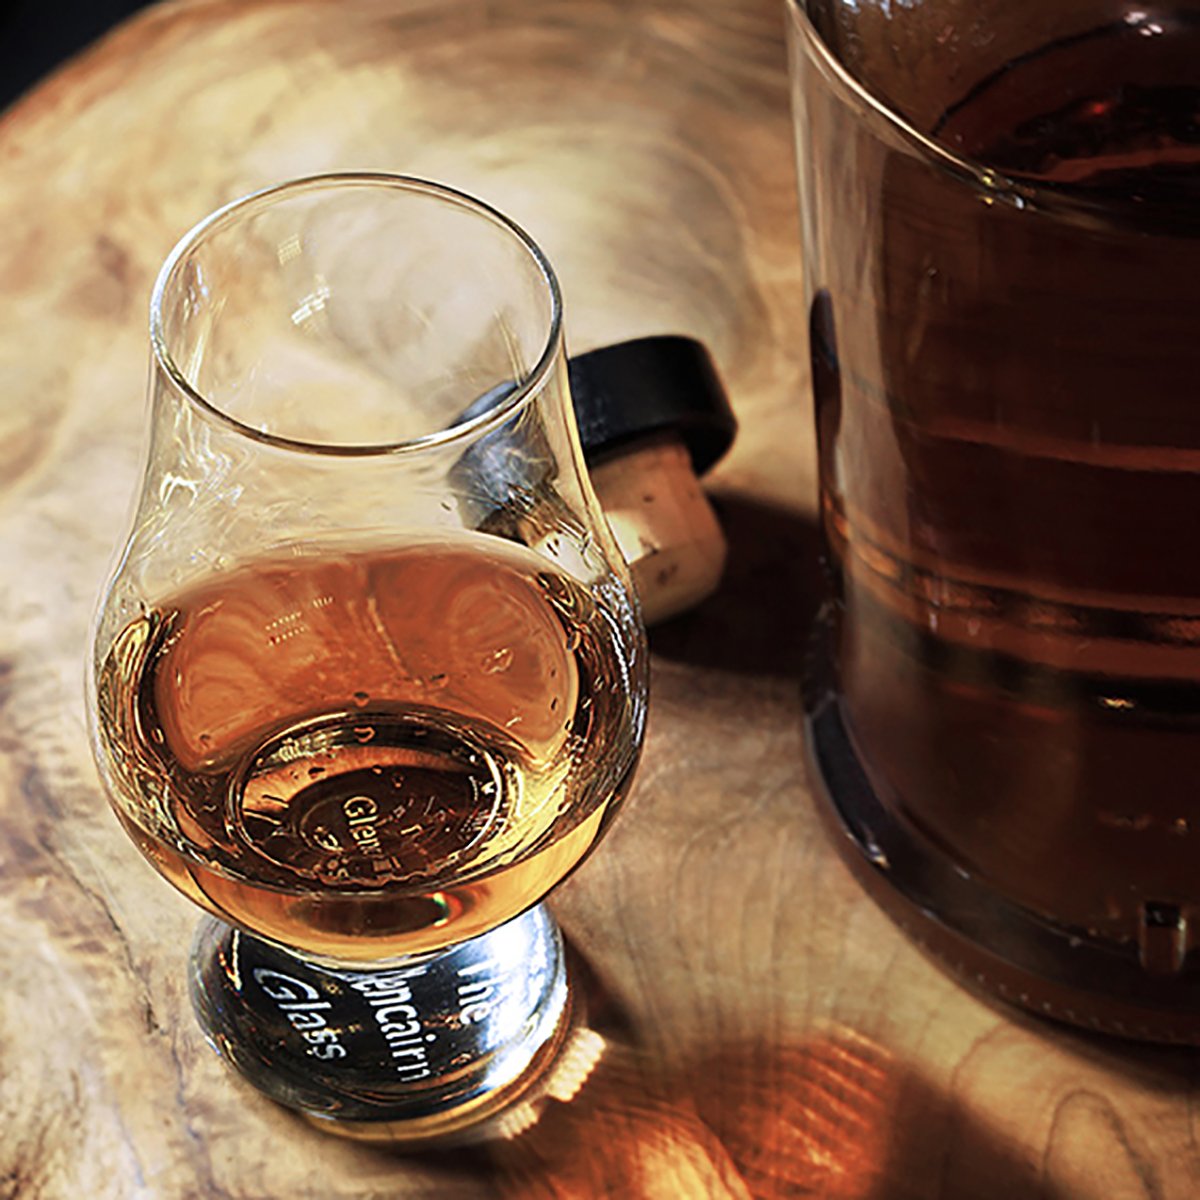 Bourbon & Rye, both are whisky's but what makes them so different? Find out at our Bourbon vs Rye Tasting this November 1st @ 7:00 p.m. 🥃 We'll dig into the history of each spirit and taste the nuances each has to offer. Learn more here >> ow.ly/EznY30lfdgi